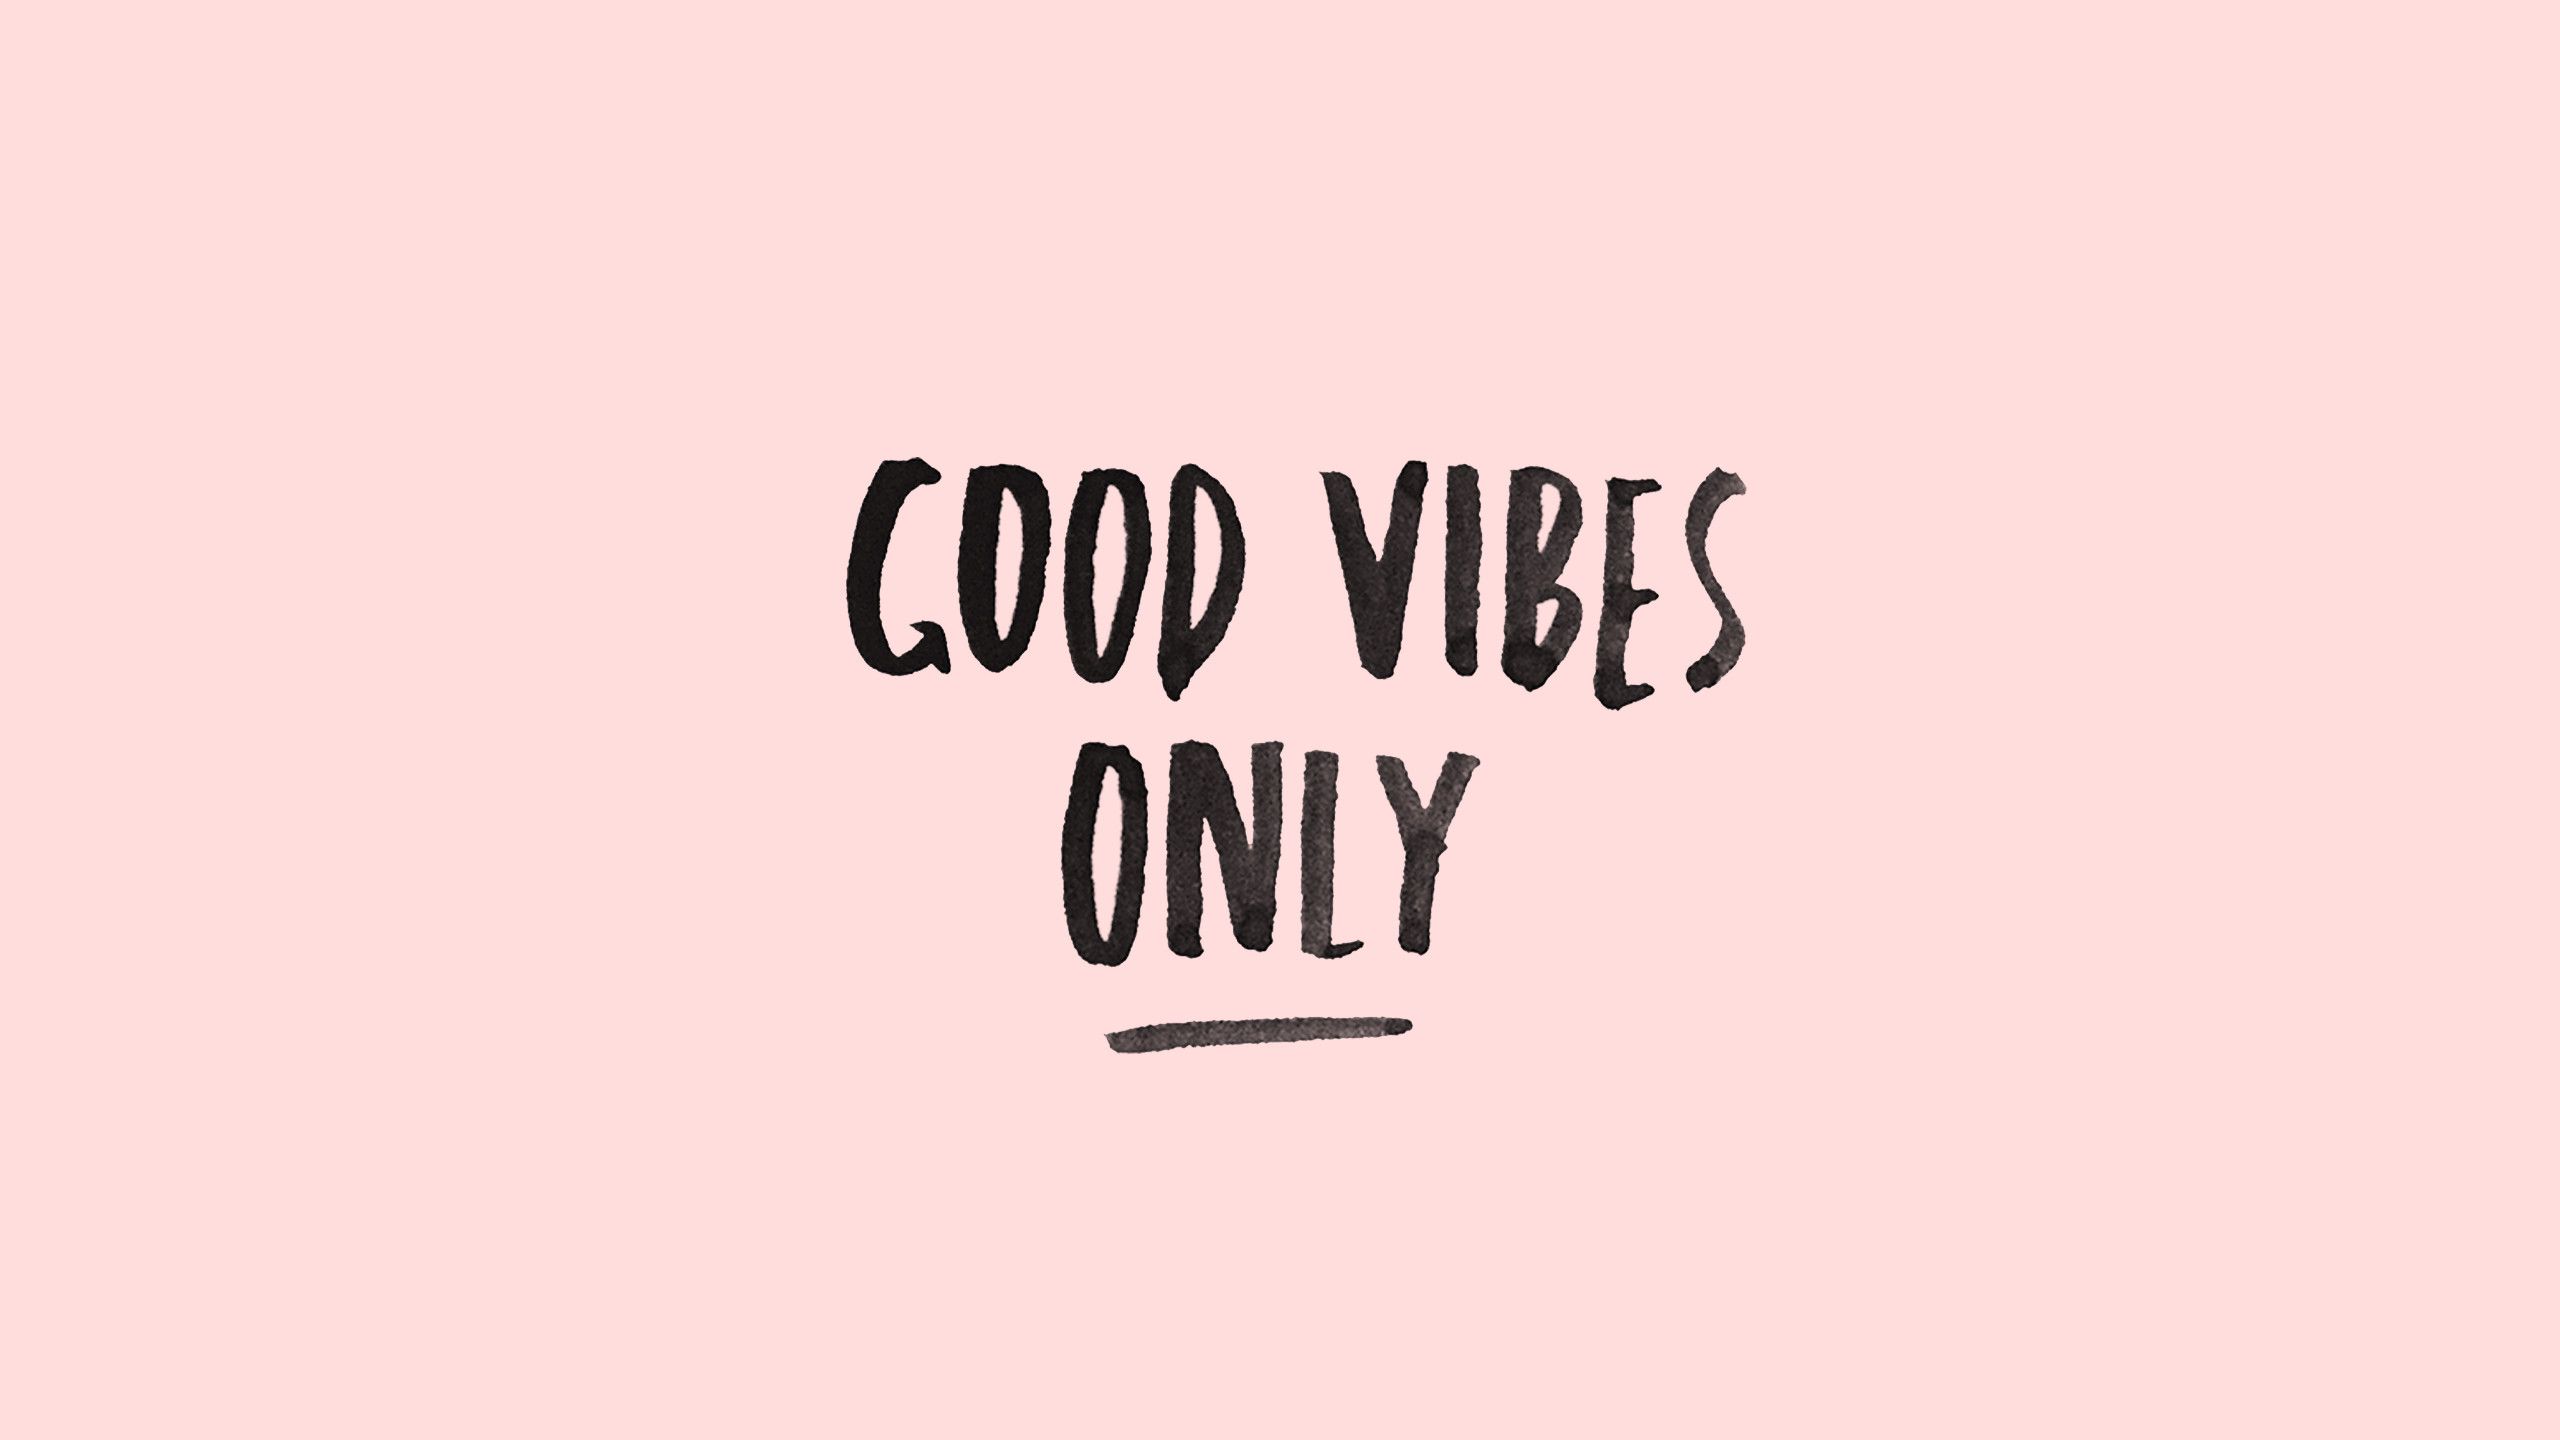 Good Vibes Only Wallpaper 2560x1440 for 1080p. Good vibes only